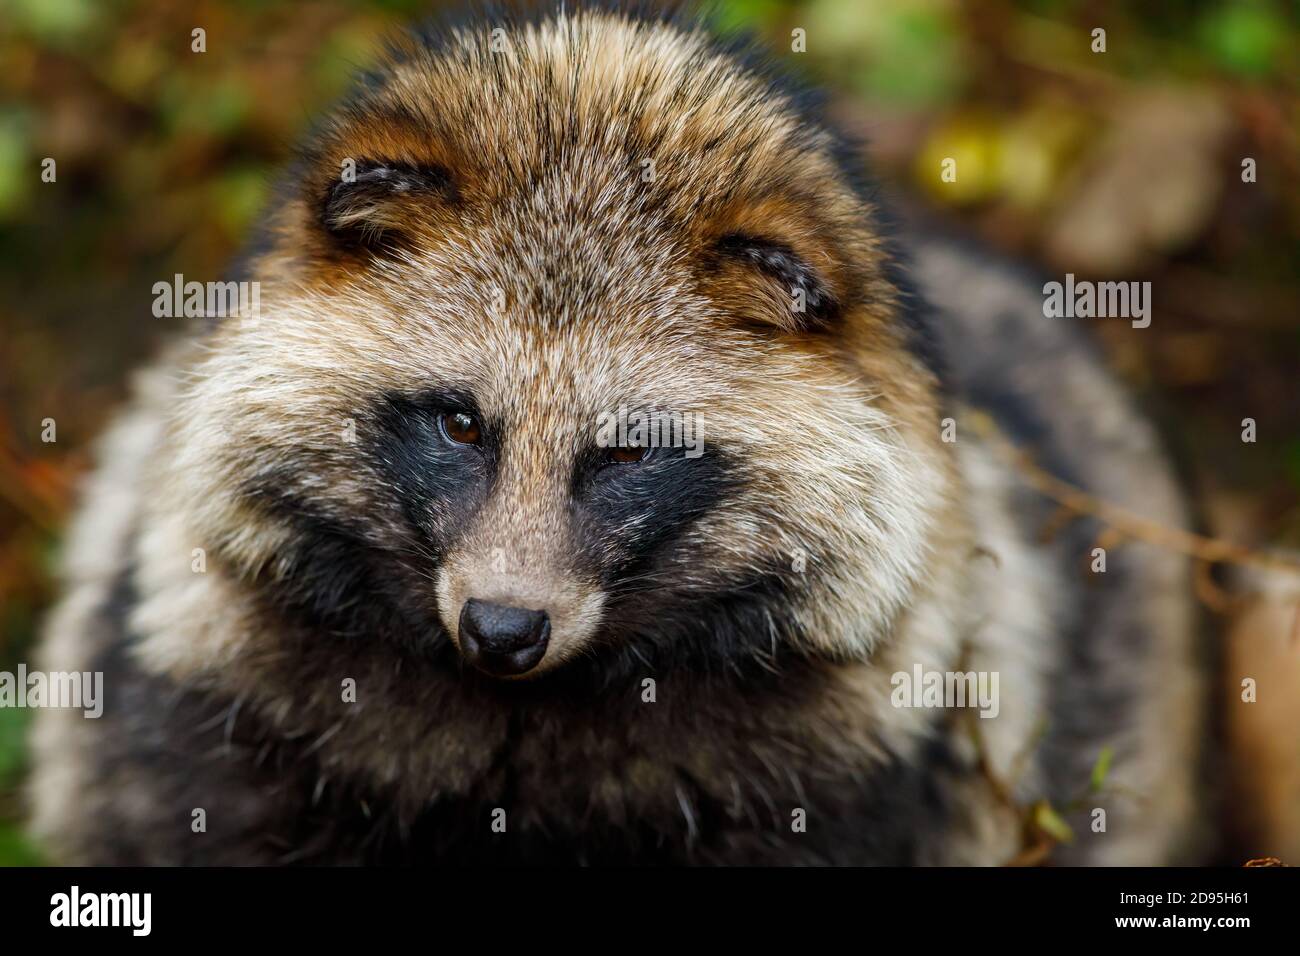 A Raccoon Dog in the forest Stock Photo